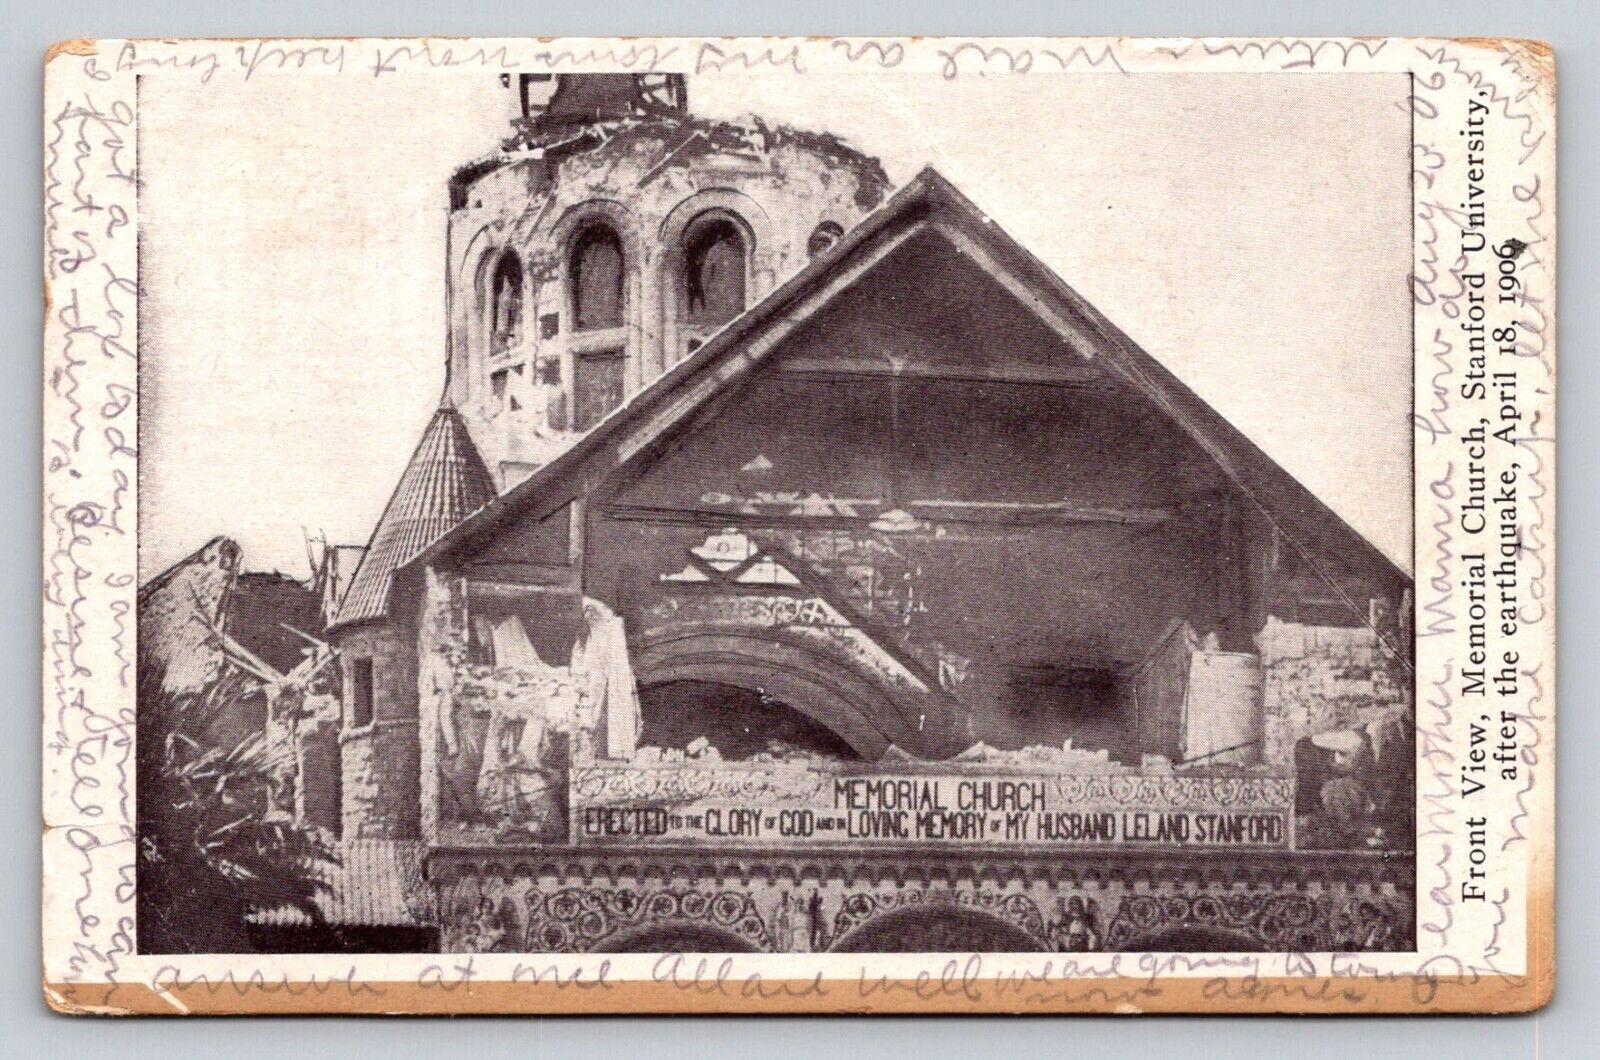 1906 Stanford University Memorial Church After Earthquake California P733